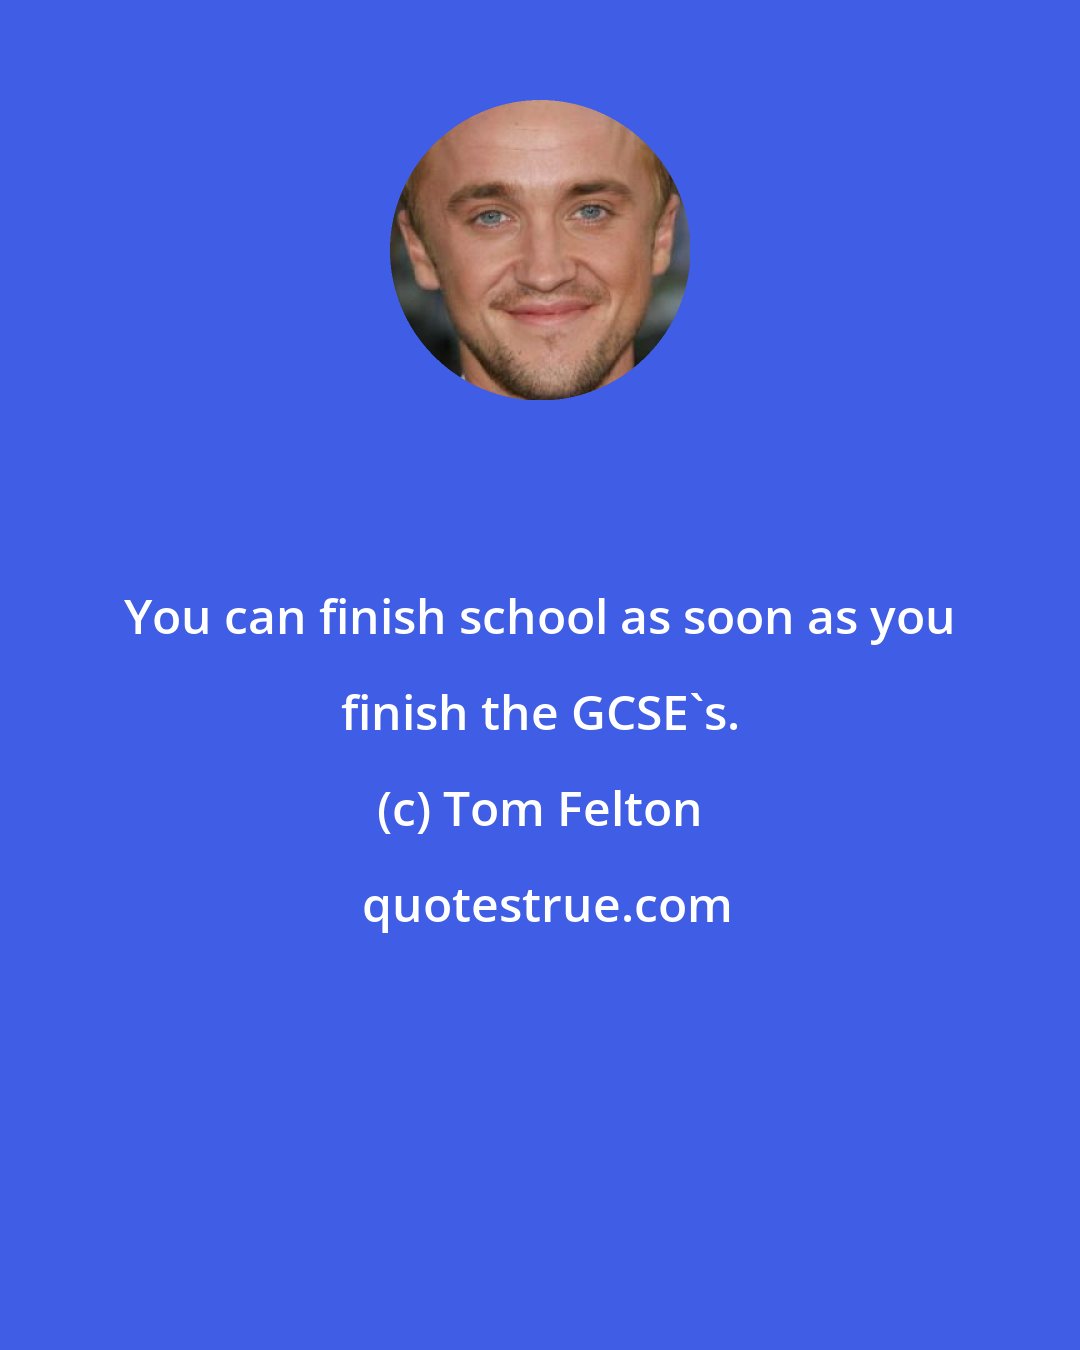 Tom Felton: You can finish school as soon as you finish the GCSE's.